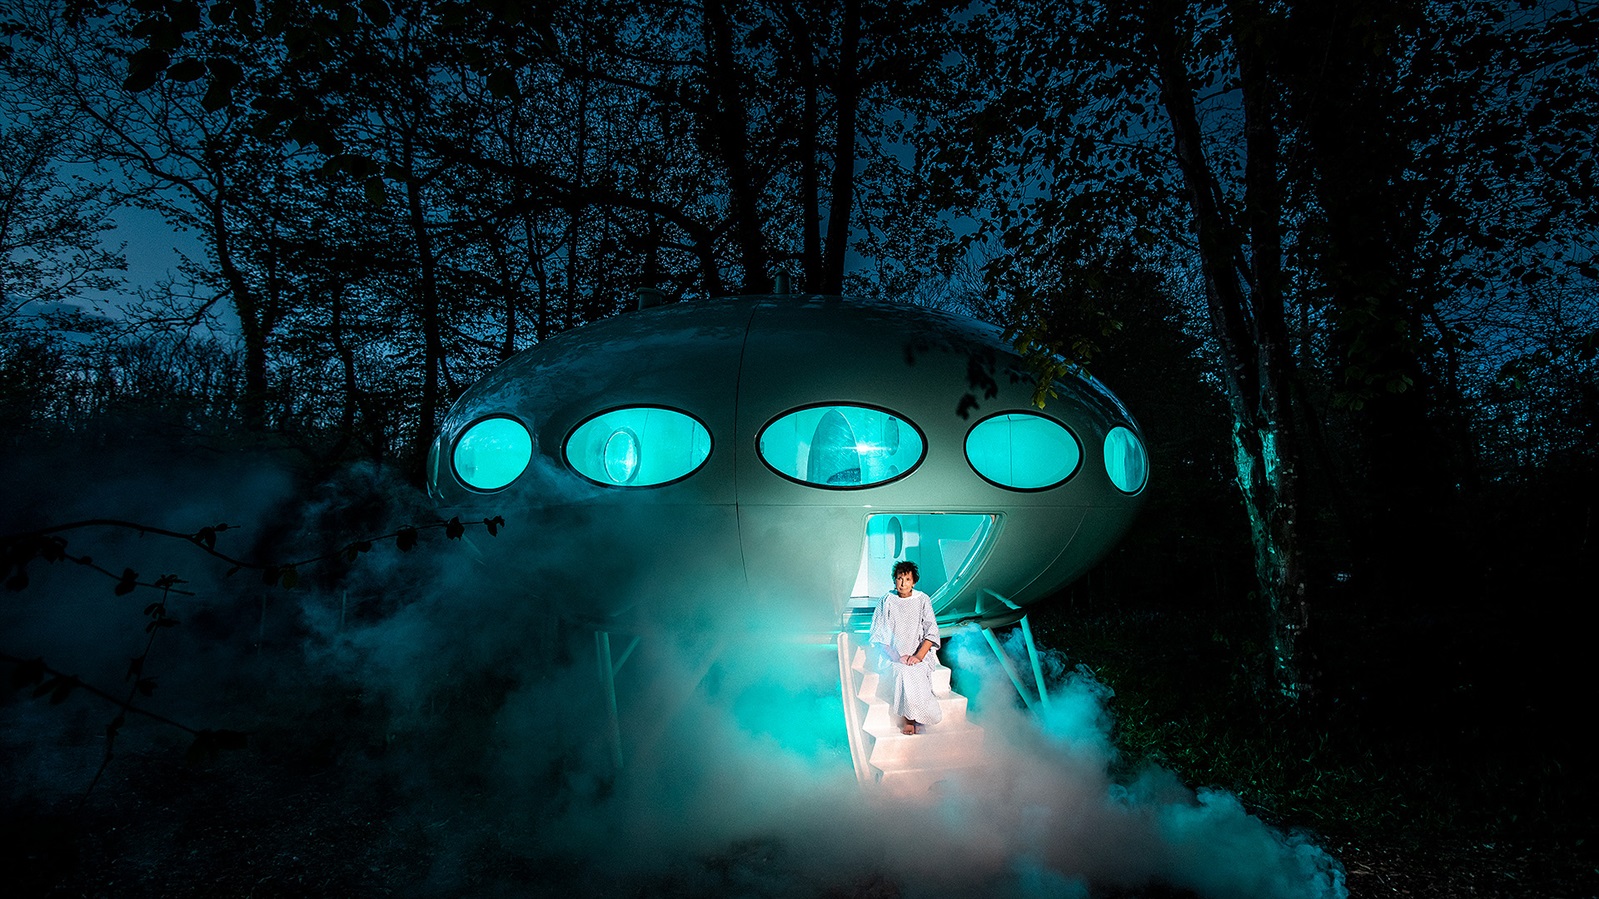 Biopsy. Woman in hospital gown sits on the steps of a spaceship in a forest at night.